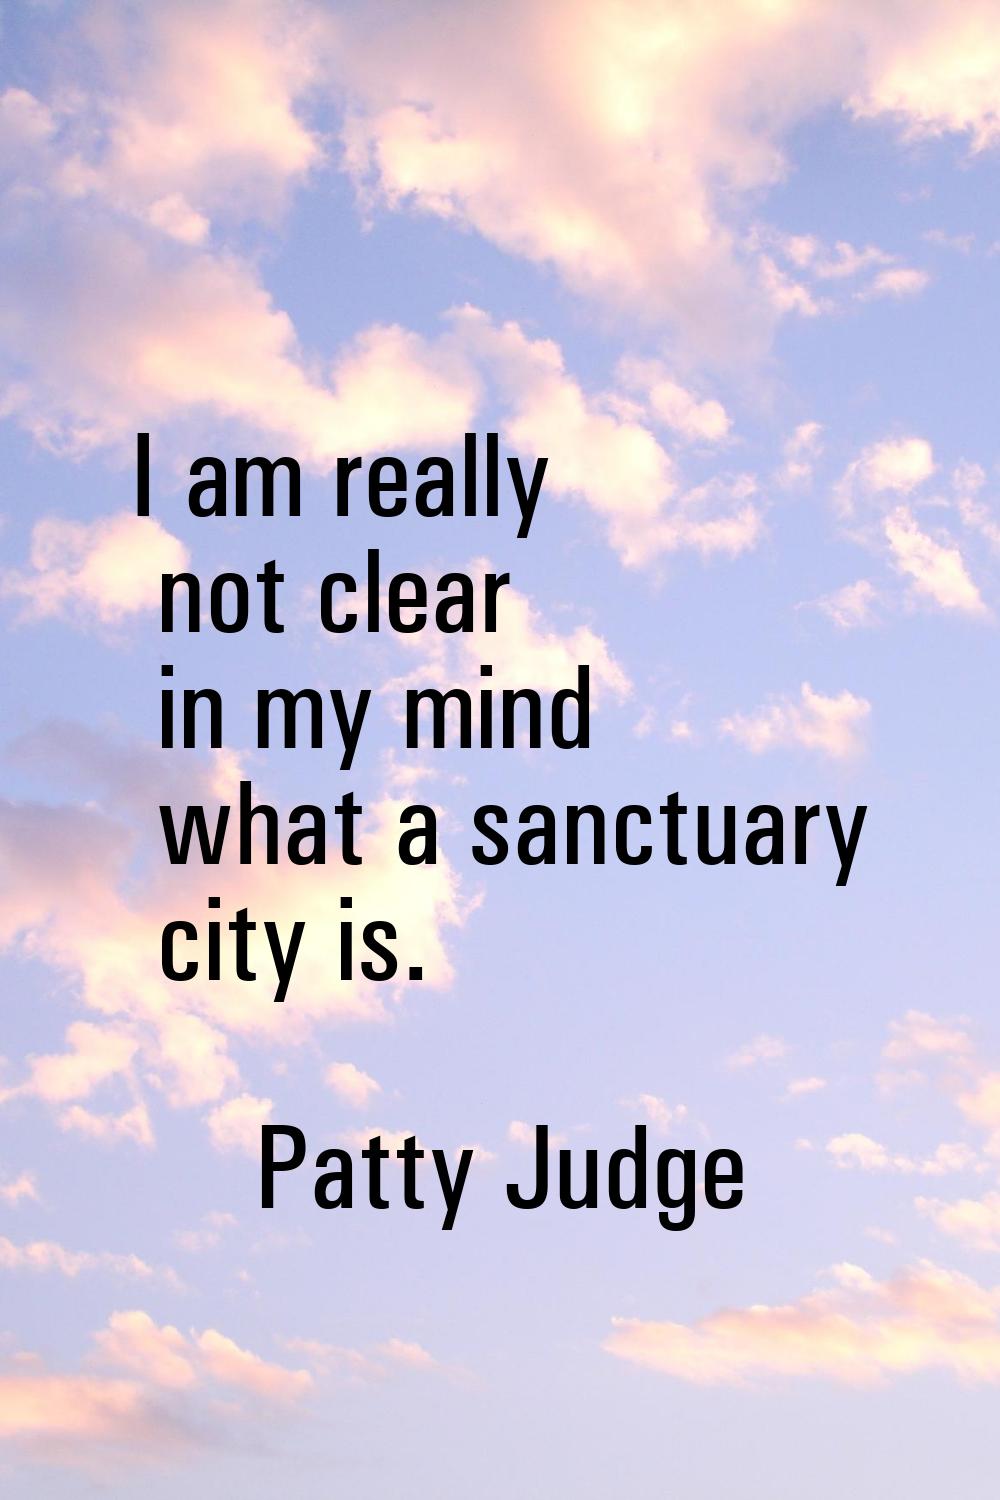 I am really not clear in my mind what a sanctuary city is.